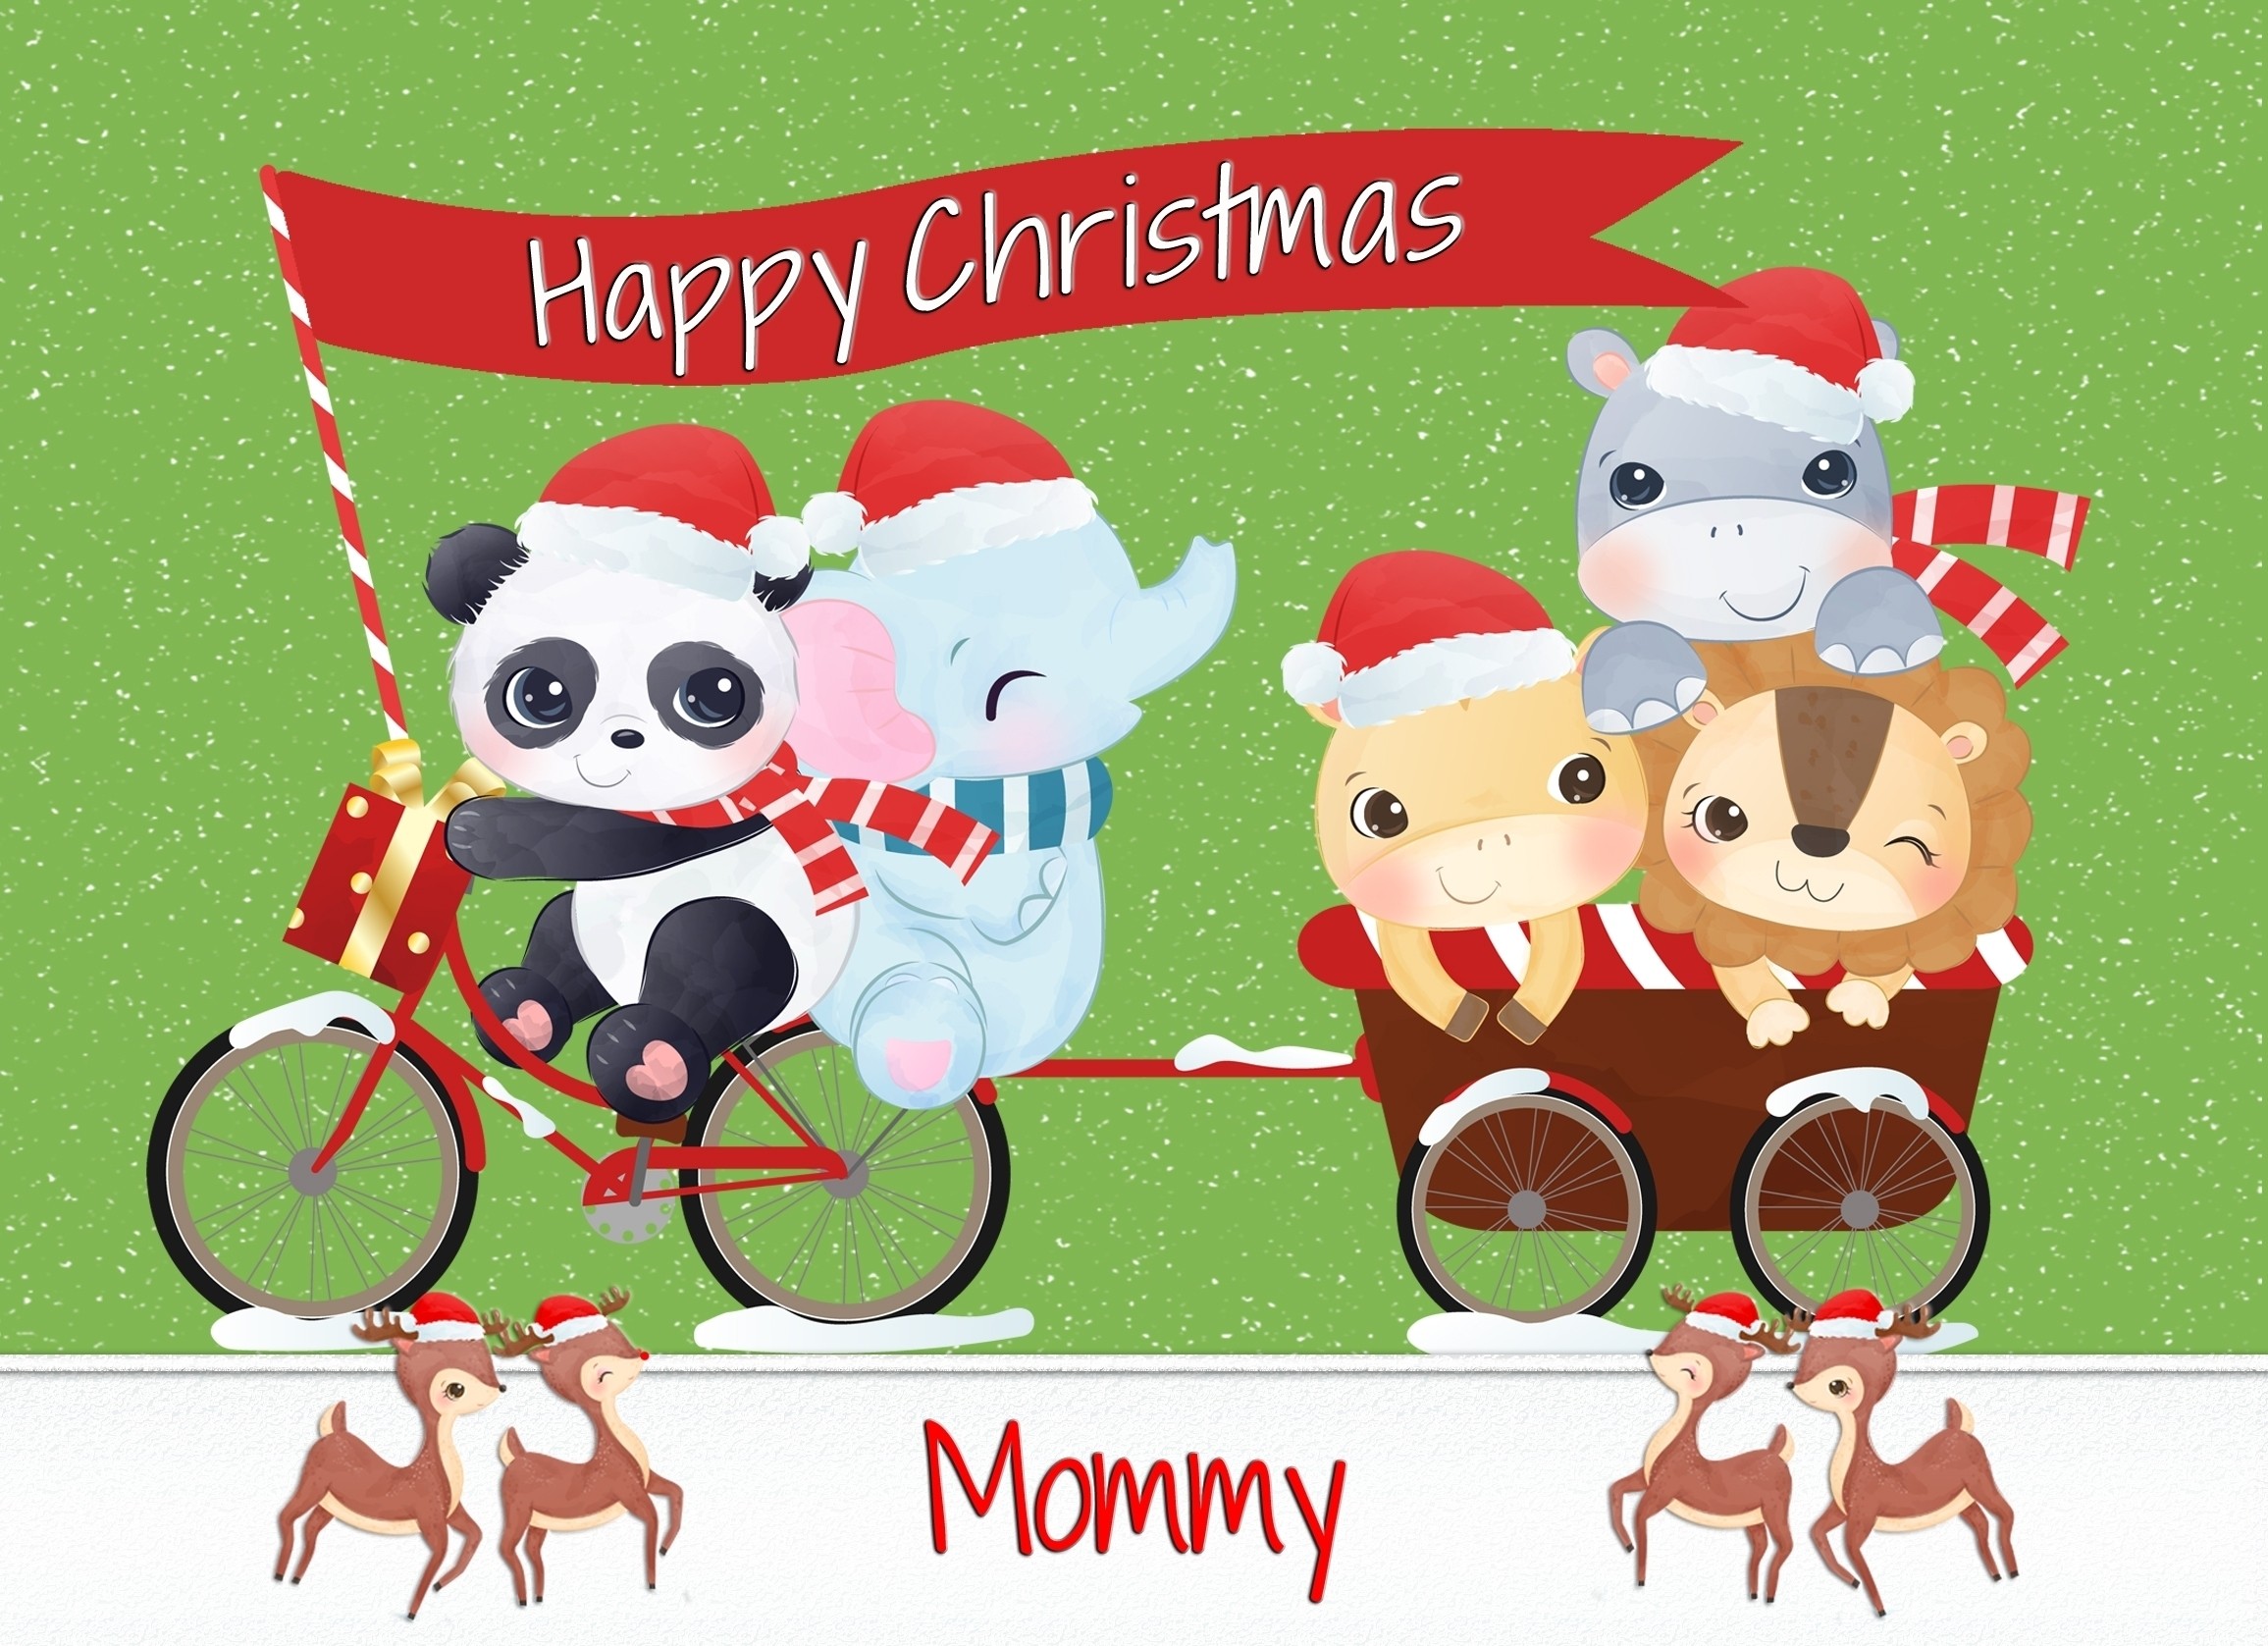 Christmas Card For Mommy (Green Animals)